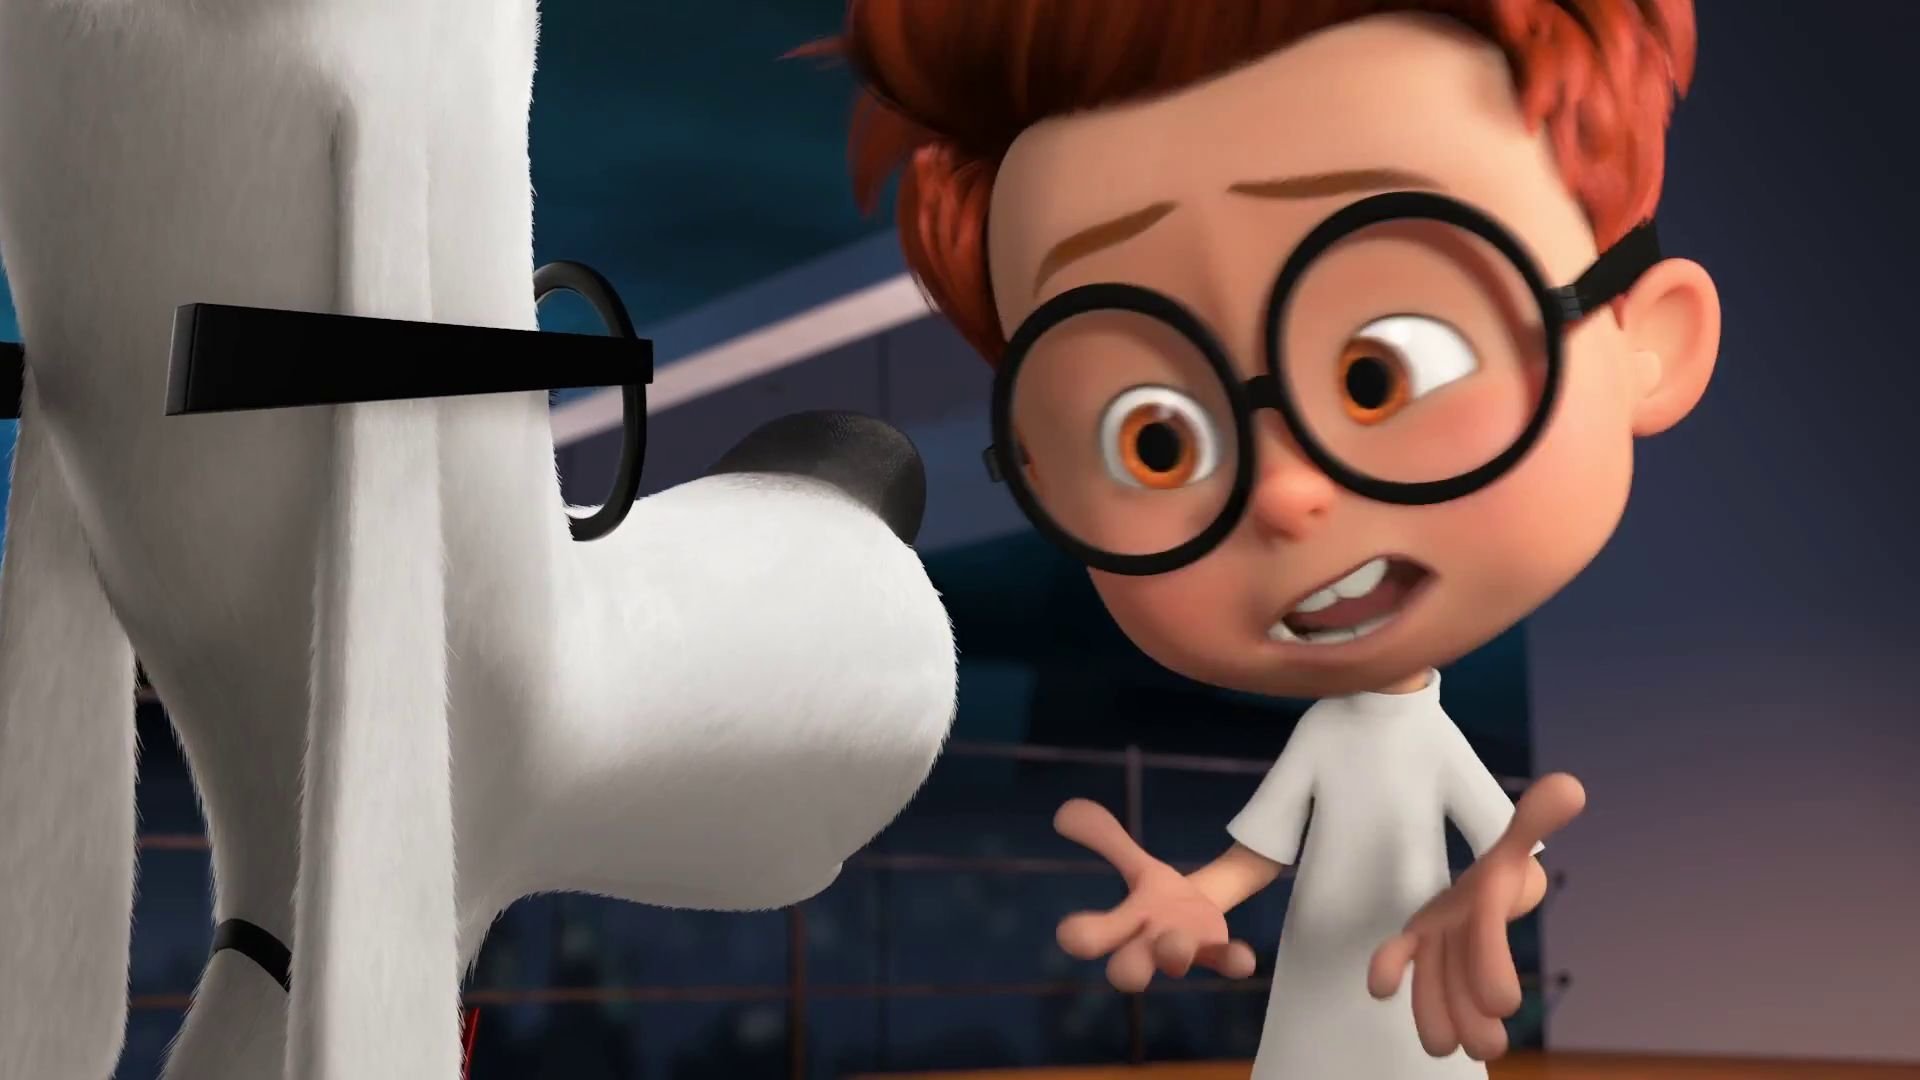 HD Quality Wallpaper | Collection: Movie, 1920x1080 Mr. Peabody & Sherman